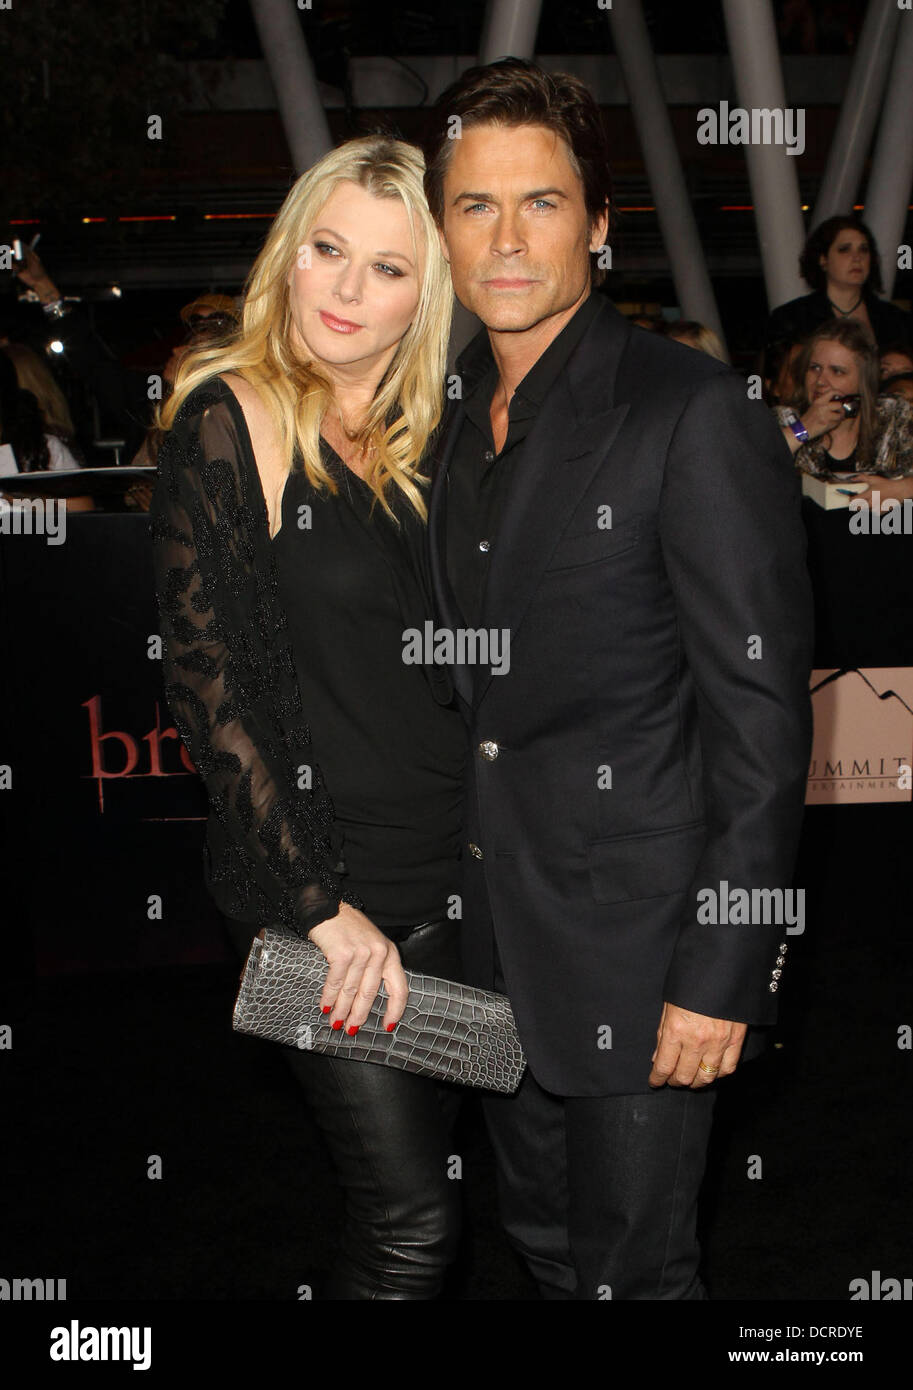 Sheryl Berkoff and Rob Lowe  The Twilight Saga: Breaking Dawn - Part 1 World Premiere held at Nokia Theatre L.A. Live Los Angeles, California - 14.11.11 Stock Photo